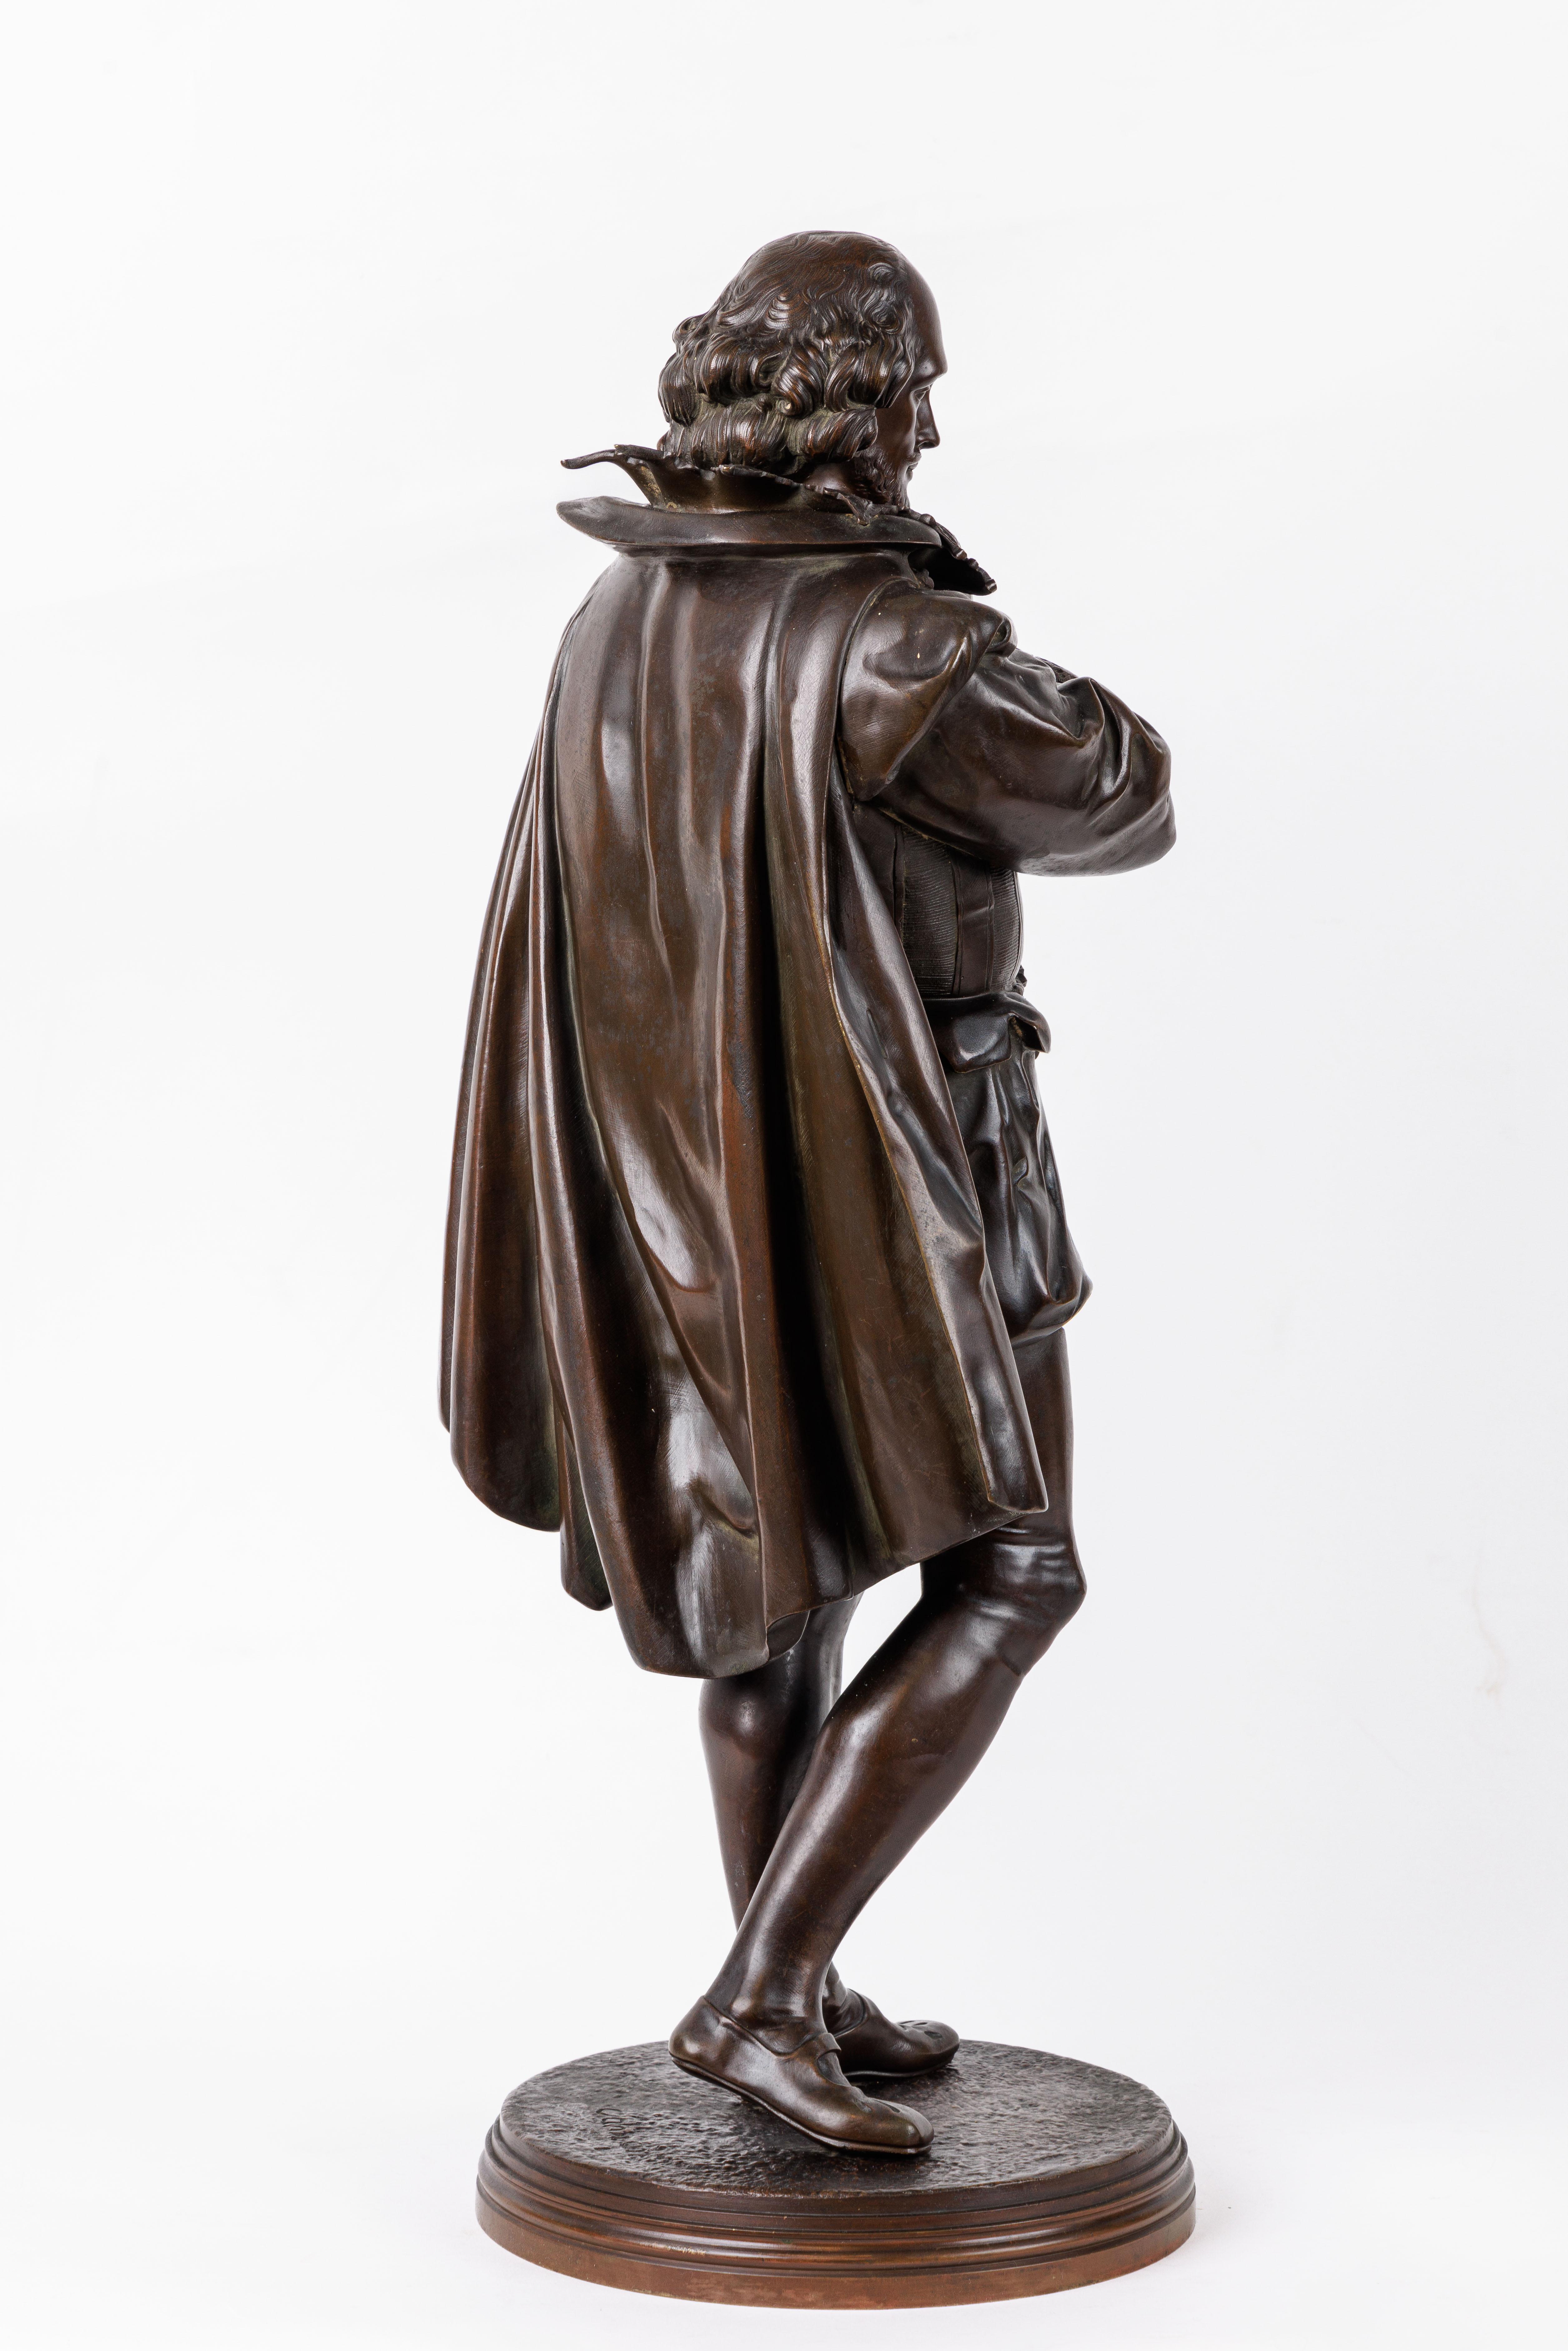 Jean Jules B. Salmson, A patinated bronze sculpture of William Shakespeare, 19th Century.

Very rare sculpture of the famous William Shakespeare. A perfect fit for any library or gentleman's office.

Signed Salmson.

Measures: 21.5